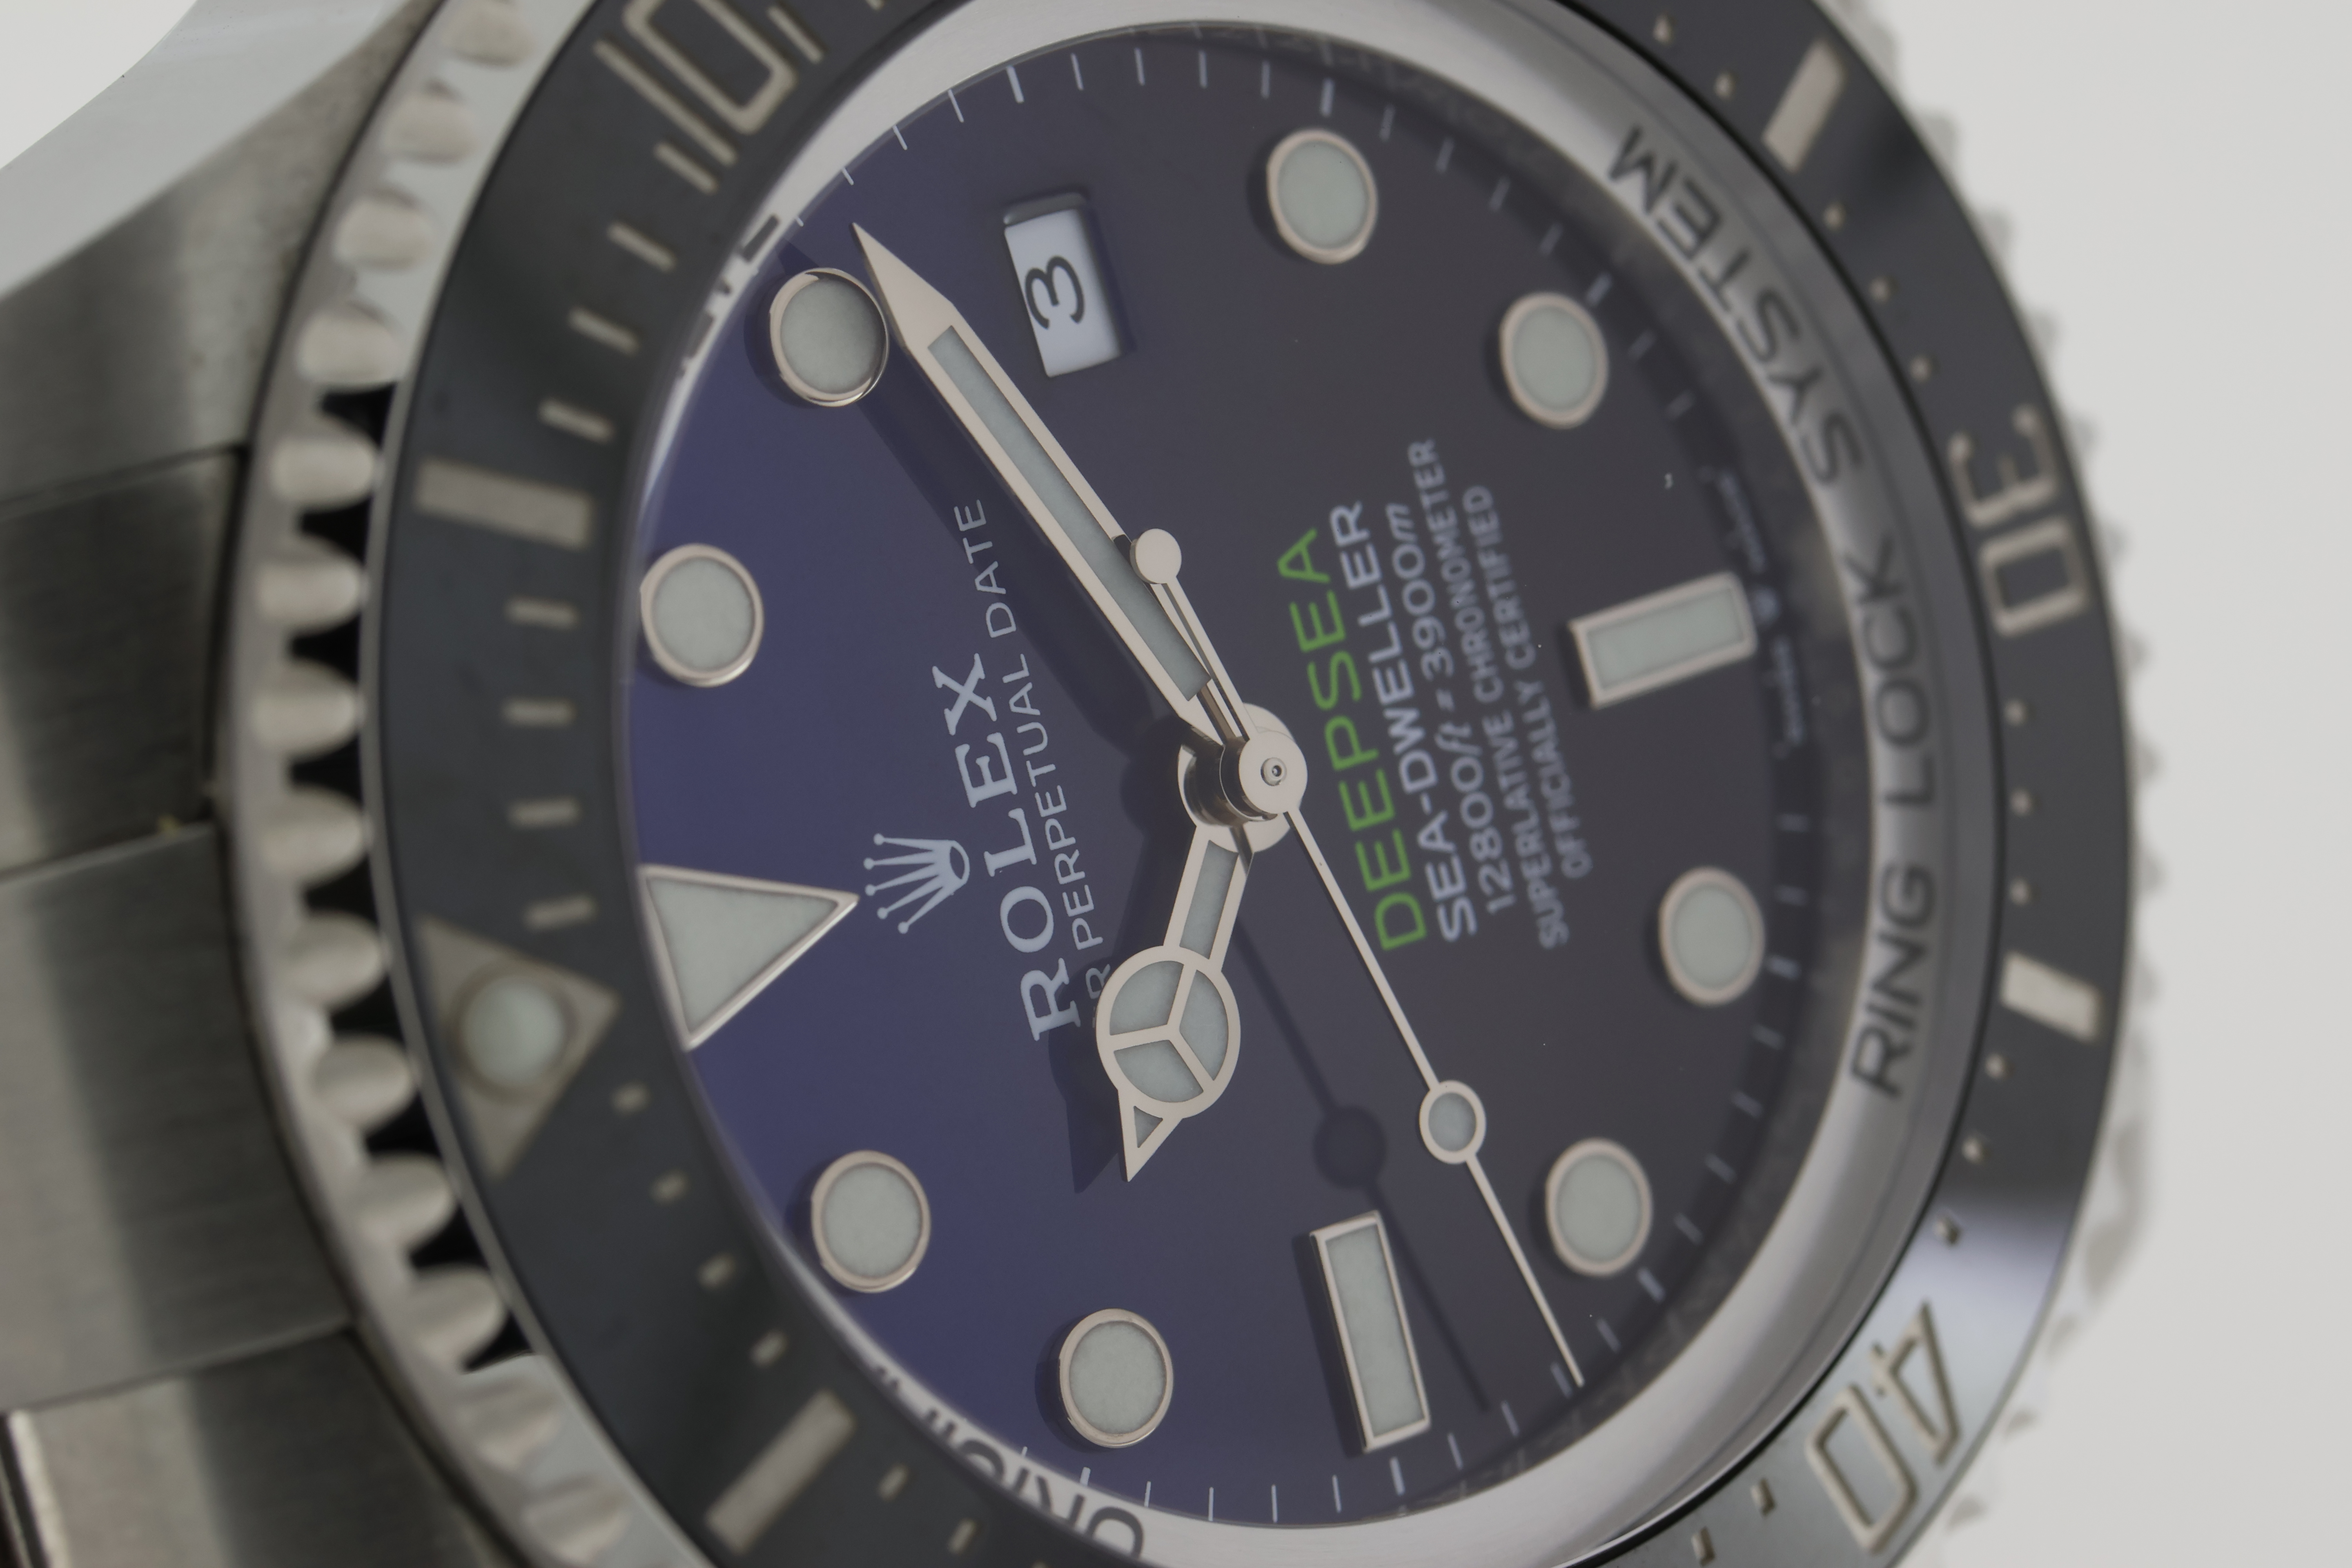 ROLEX SEA DWELLER DEEPSEA 'JAMES CAMERON' REFERENCE 126660 WITH PAPERS 2022 - Image 3 of 6